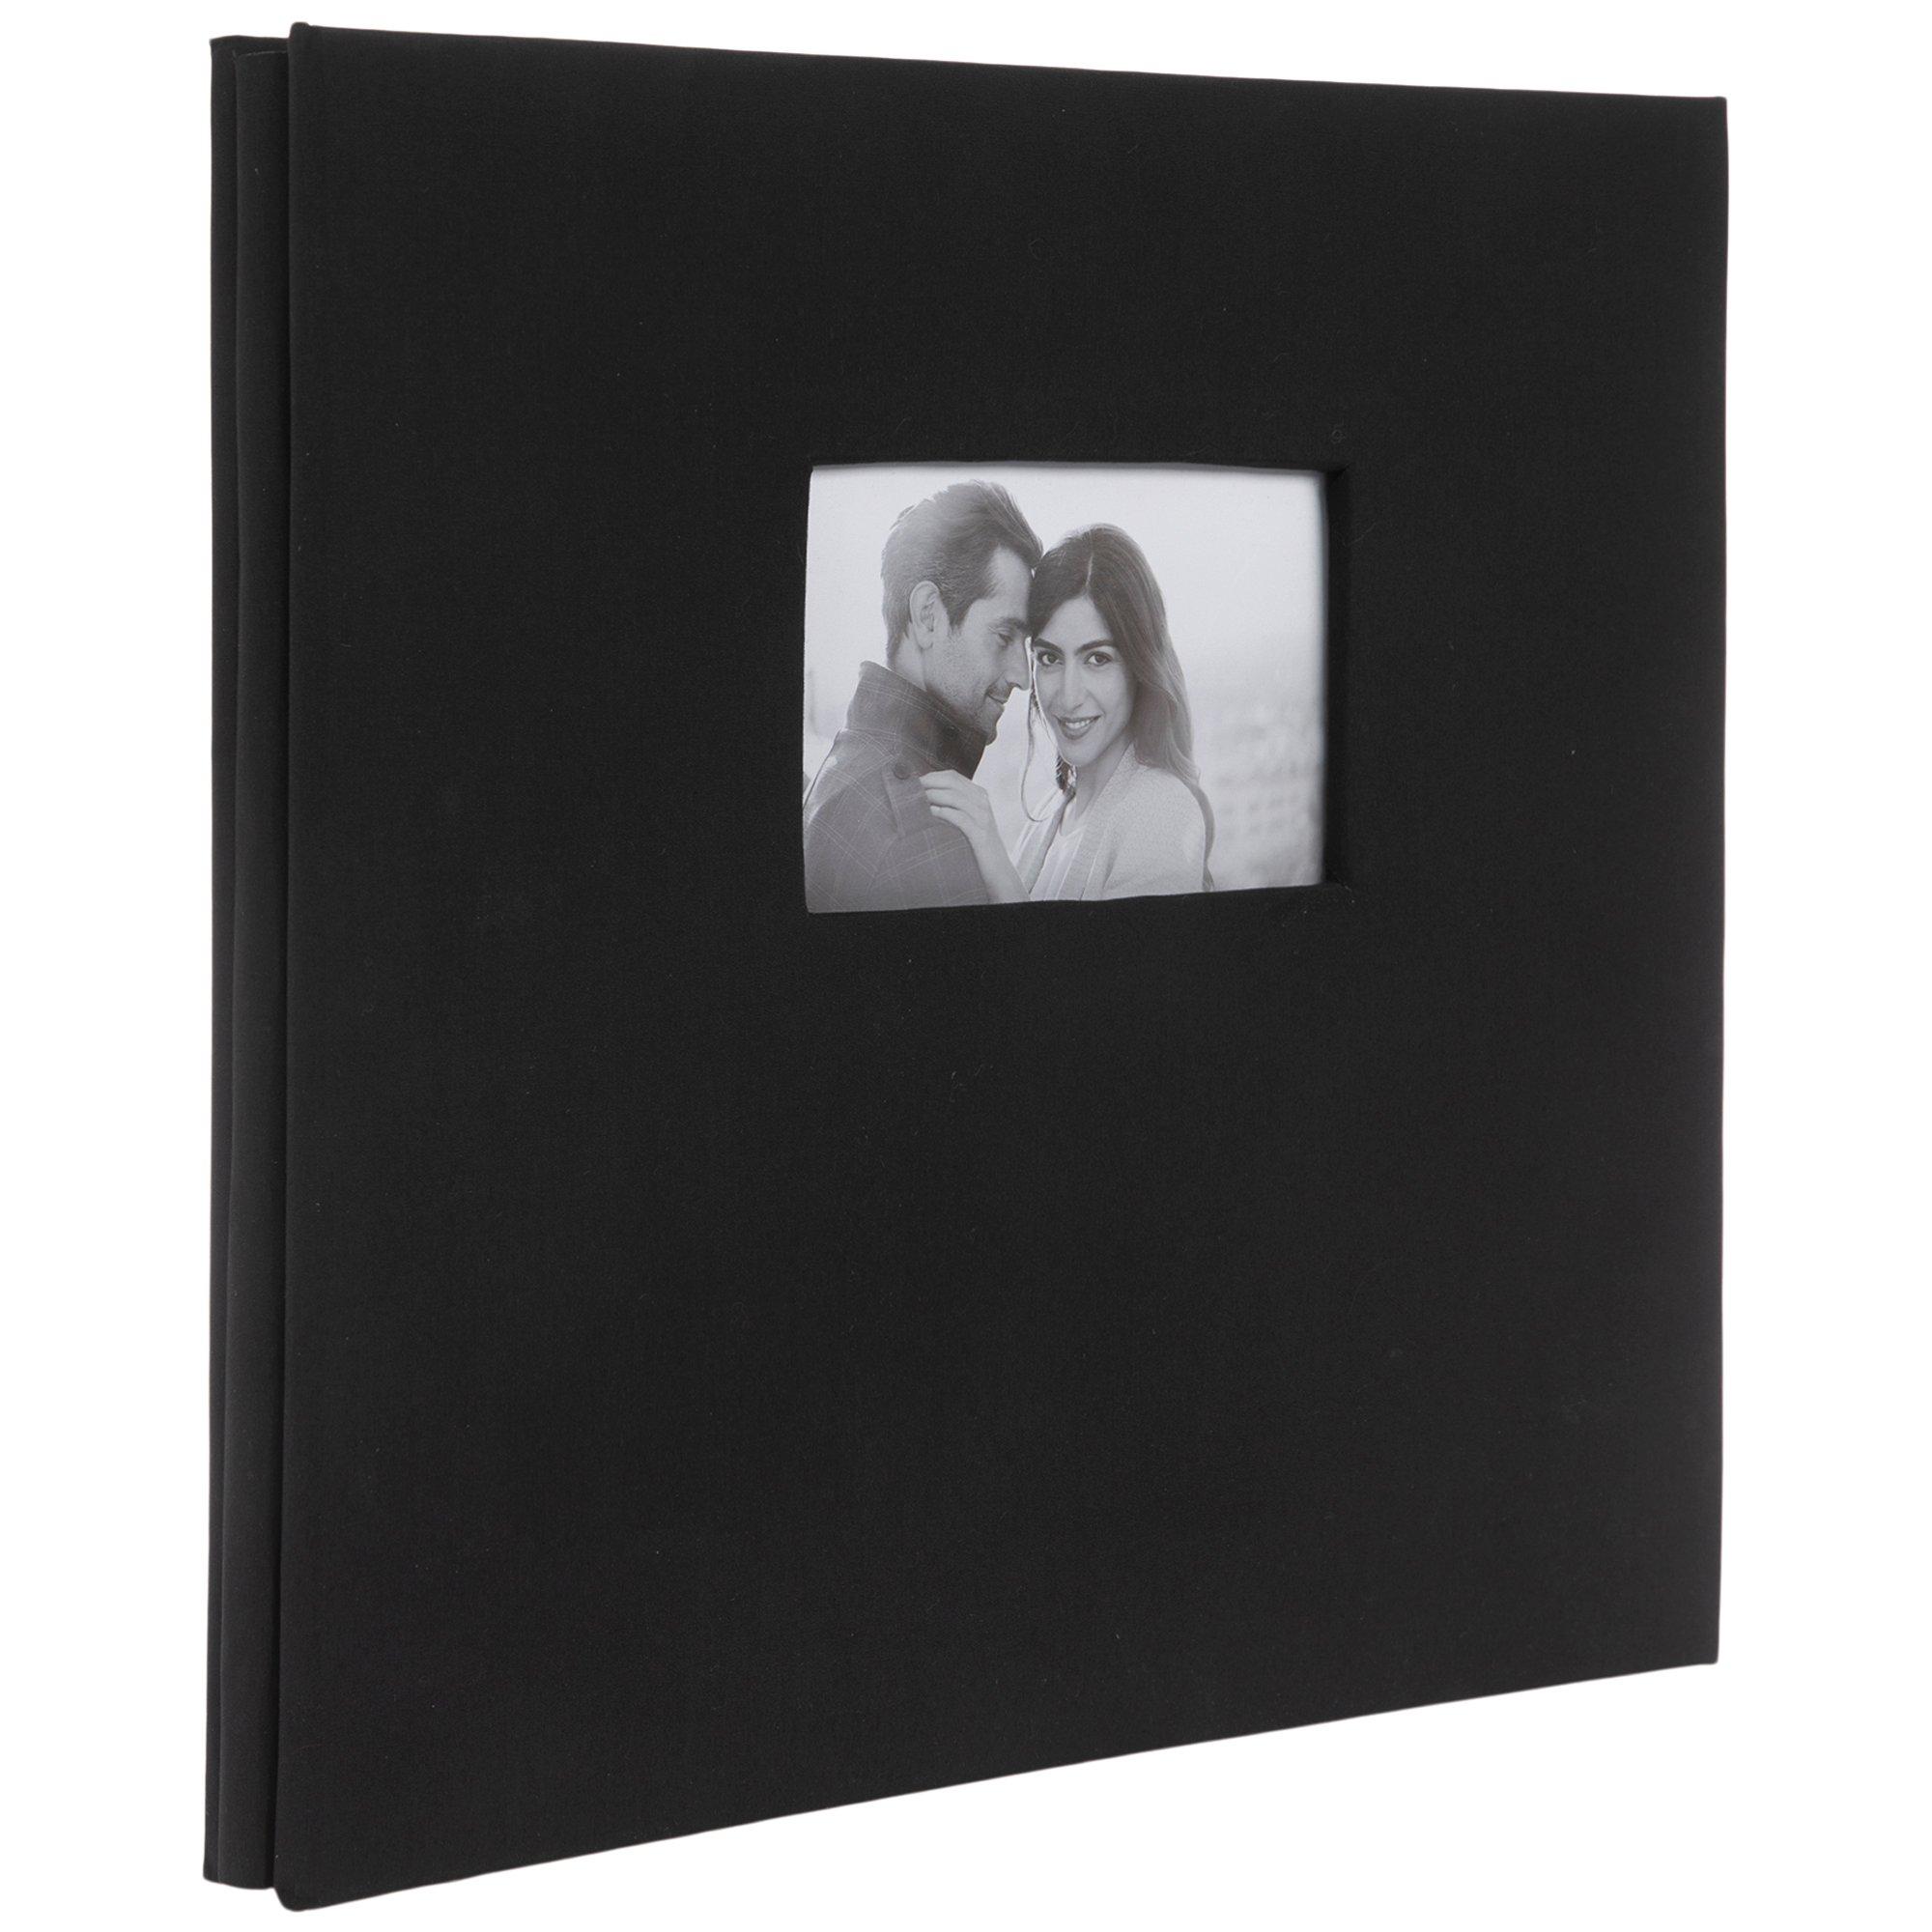 Post-Bound Black pocket album for 5x7 and/or 8x10 prints - Picture Frames,  Photo Albums, Personalized and Engraved Digital Photo Gifts - SendAFrame